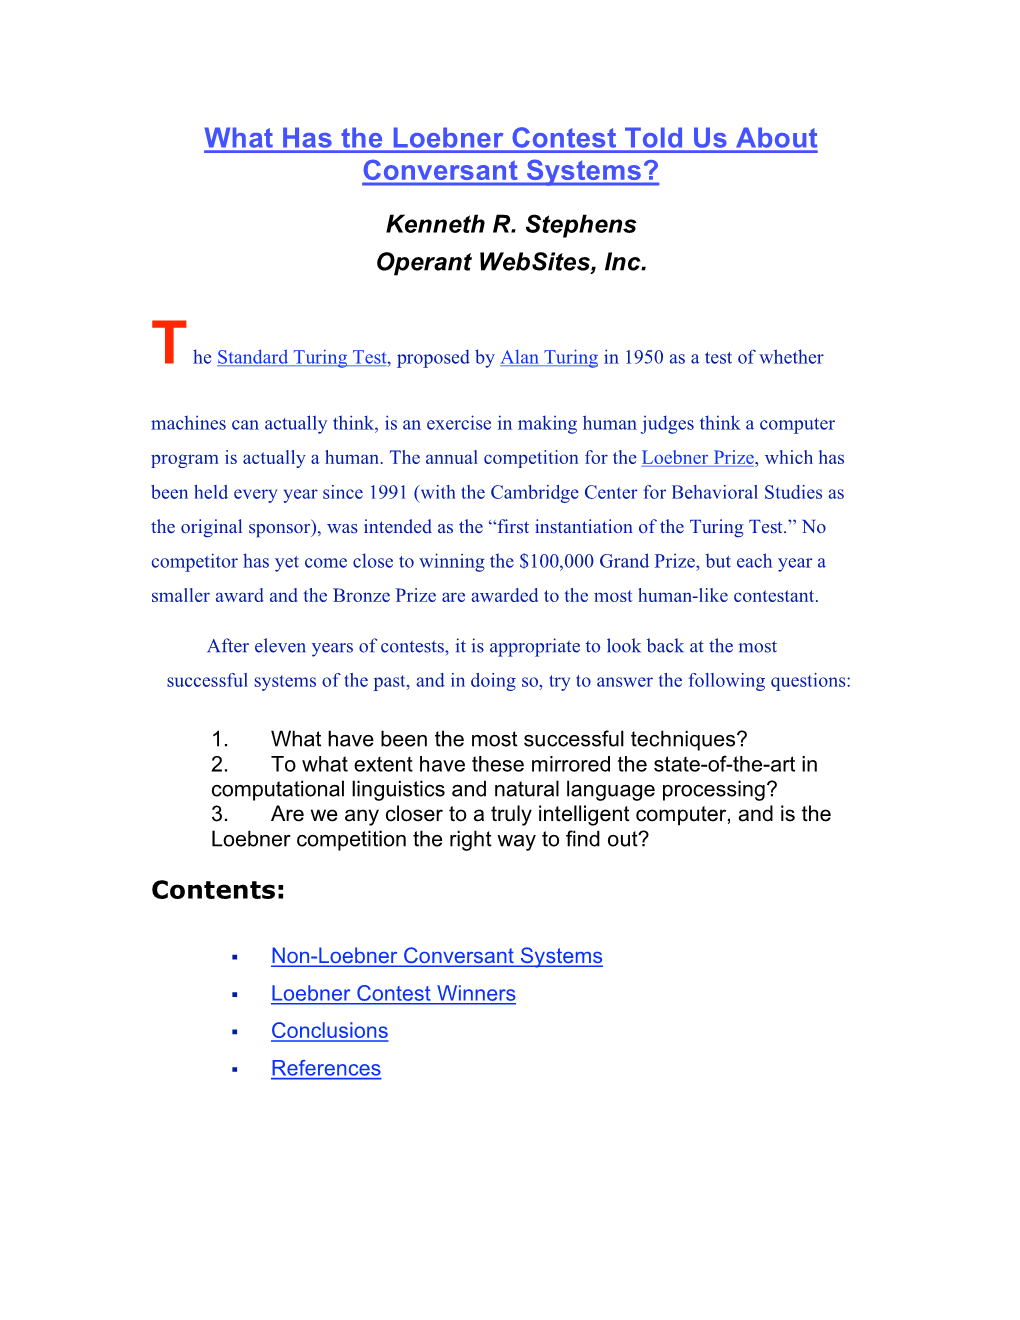 What Has the Loebner Contest Told Us About Conversant Systems?